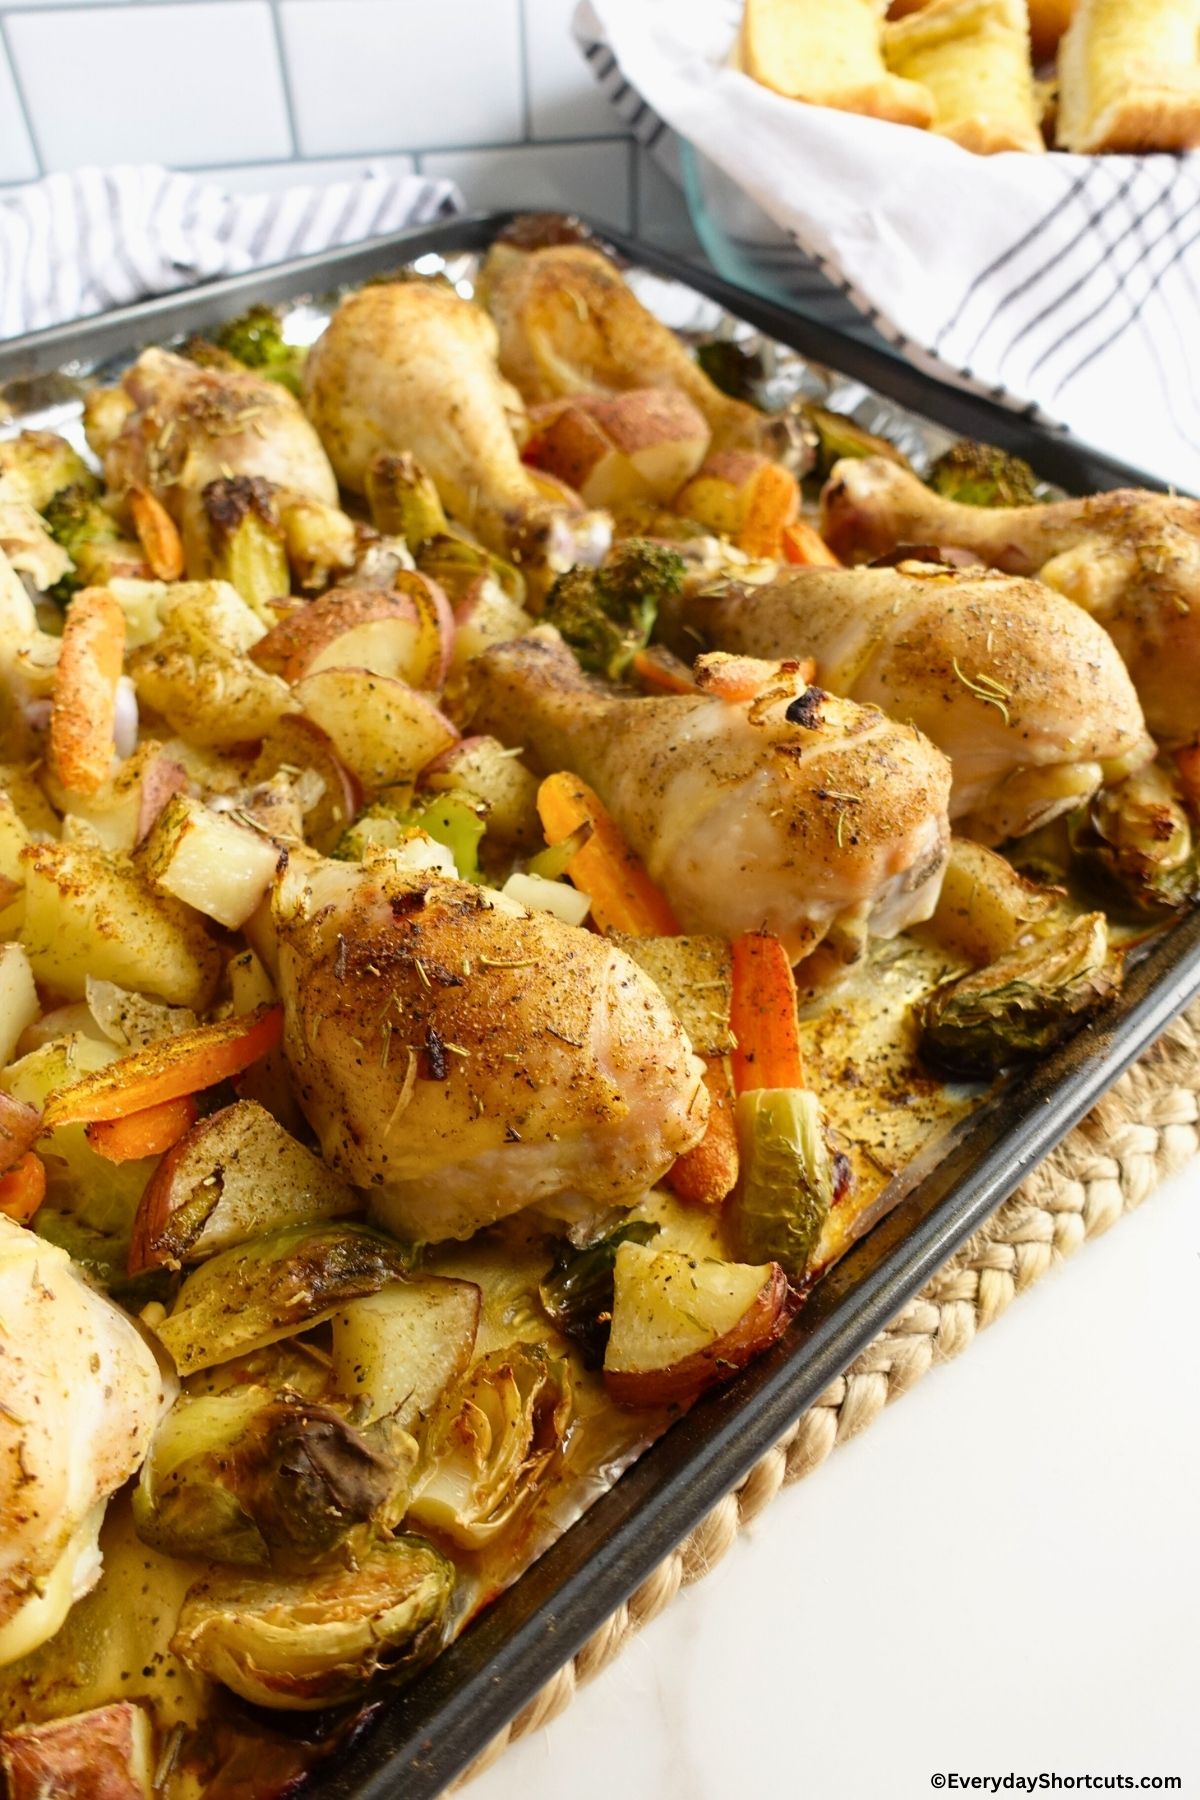 cooked chicken and veggies on a baking pan